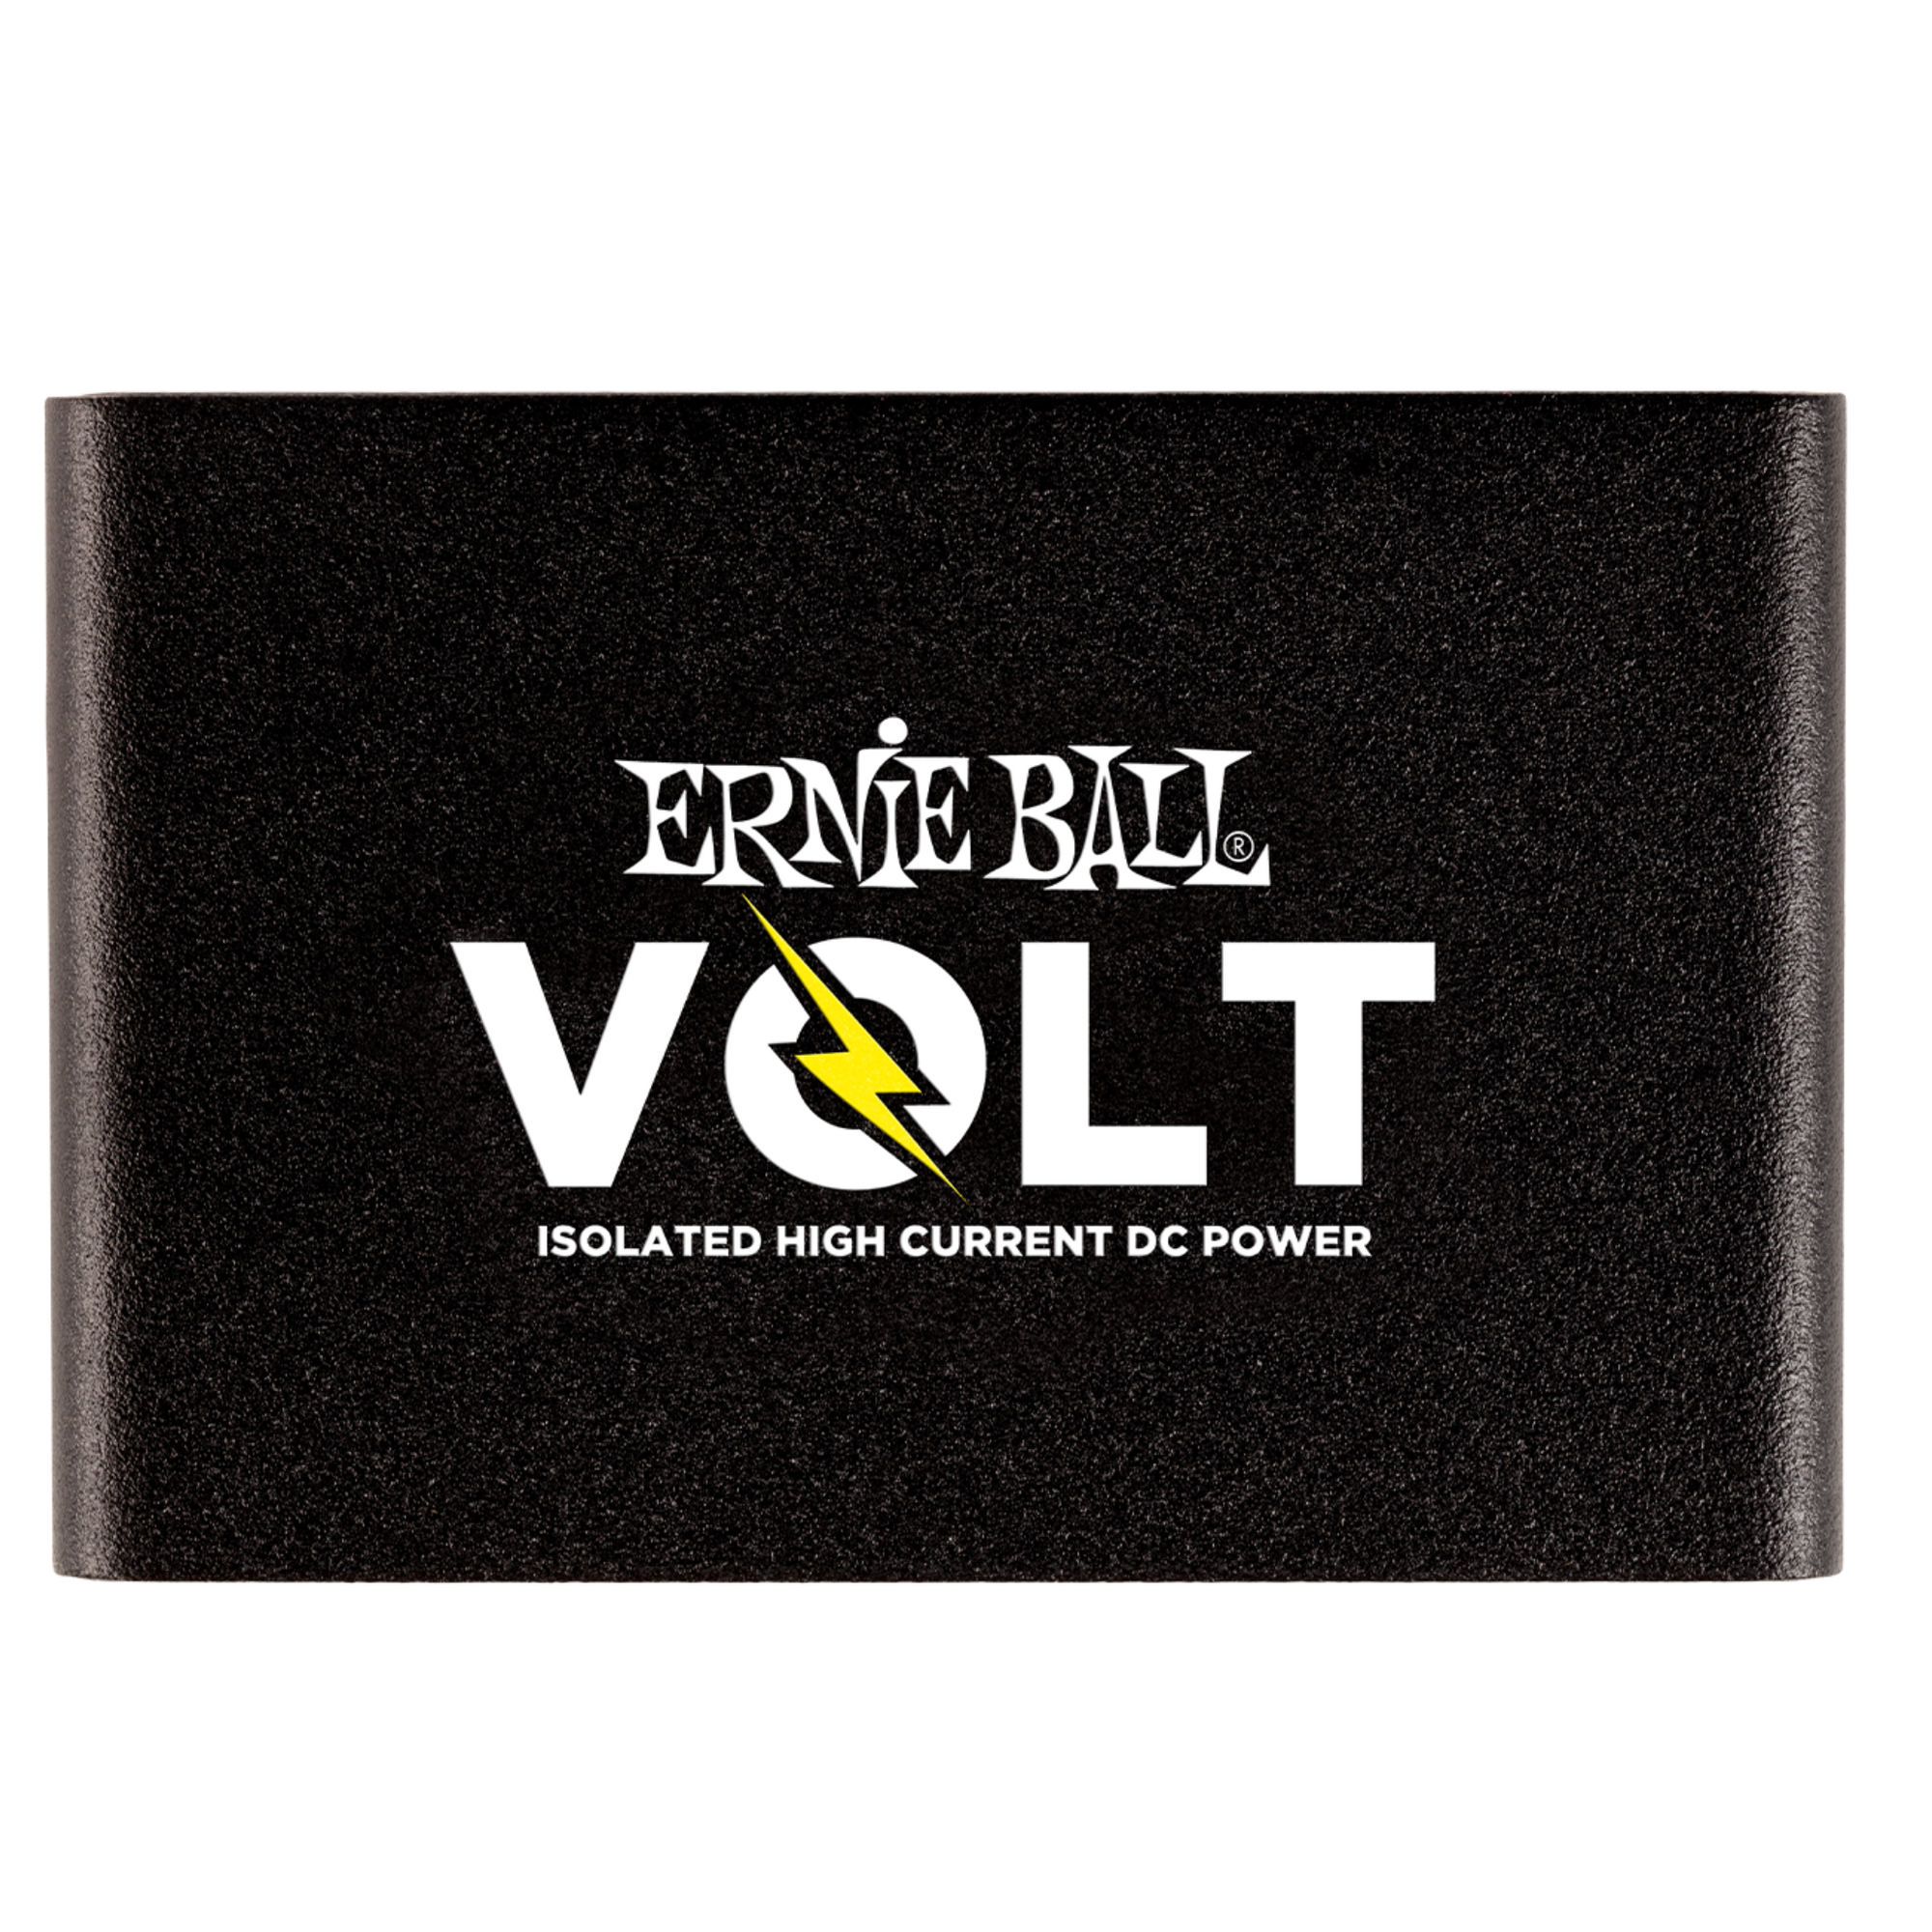 Ernie Ball  Volt Regulated 9 and 18 Volt DC out -  Guitar Pedal Power Supply 9604 P06191 Top View